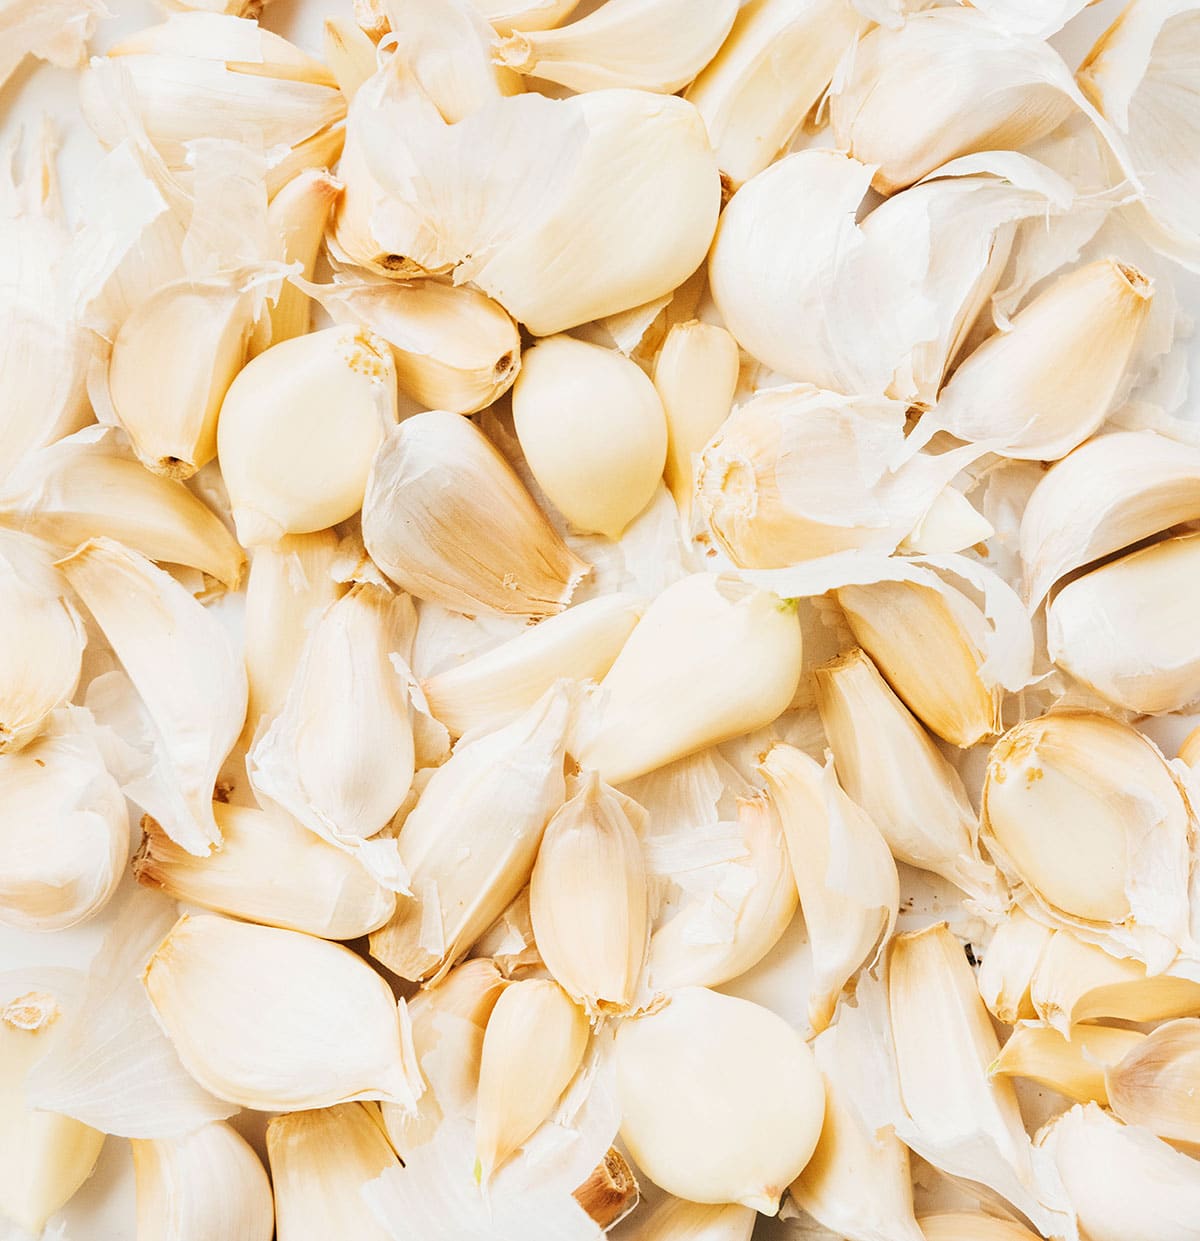 A close up view detailing the texture of a large pile of unpeeled garlic cloves